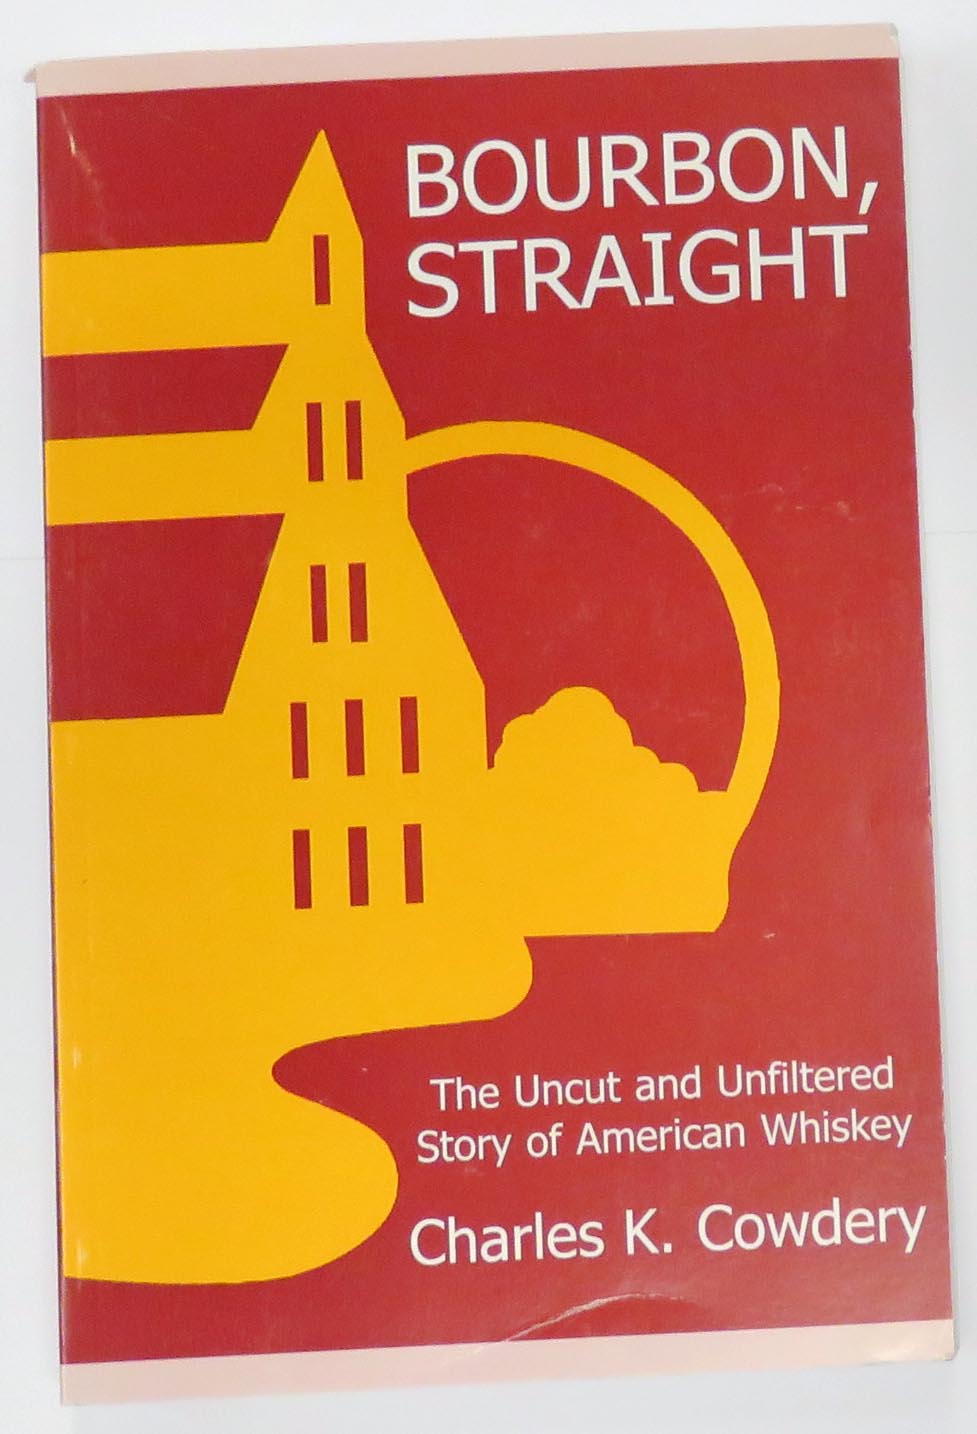 Bourbon Straight The Uncut and Unfiltered Story of American Whiskey 